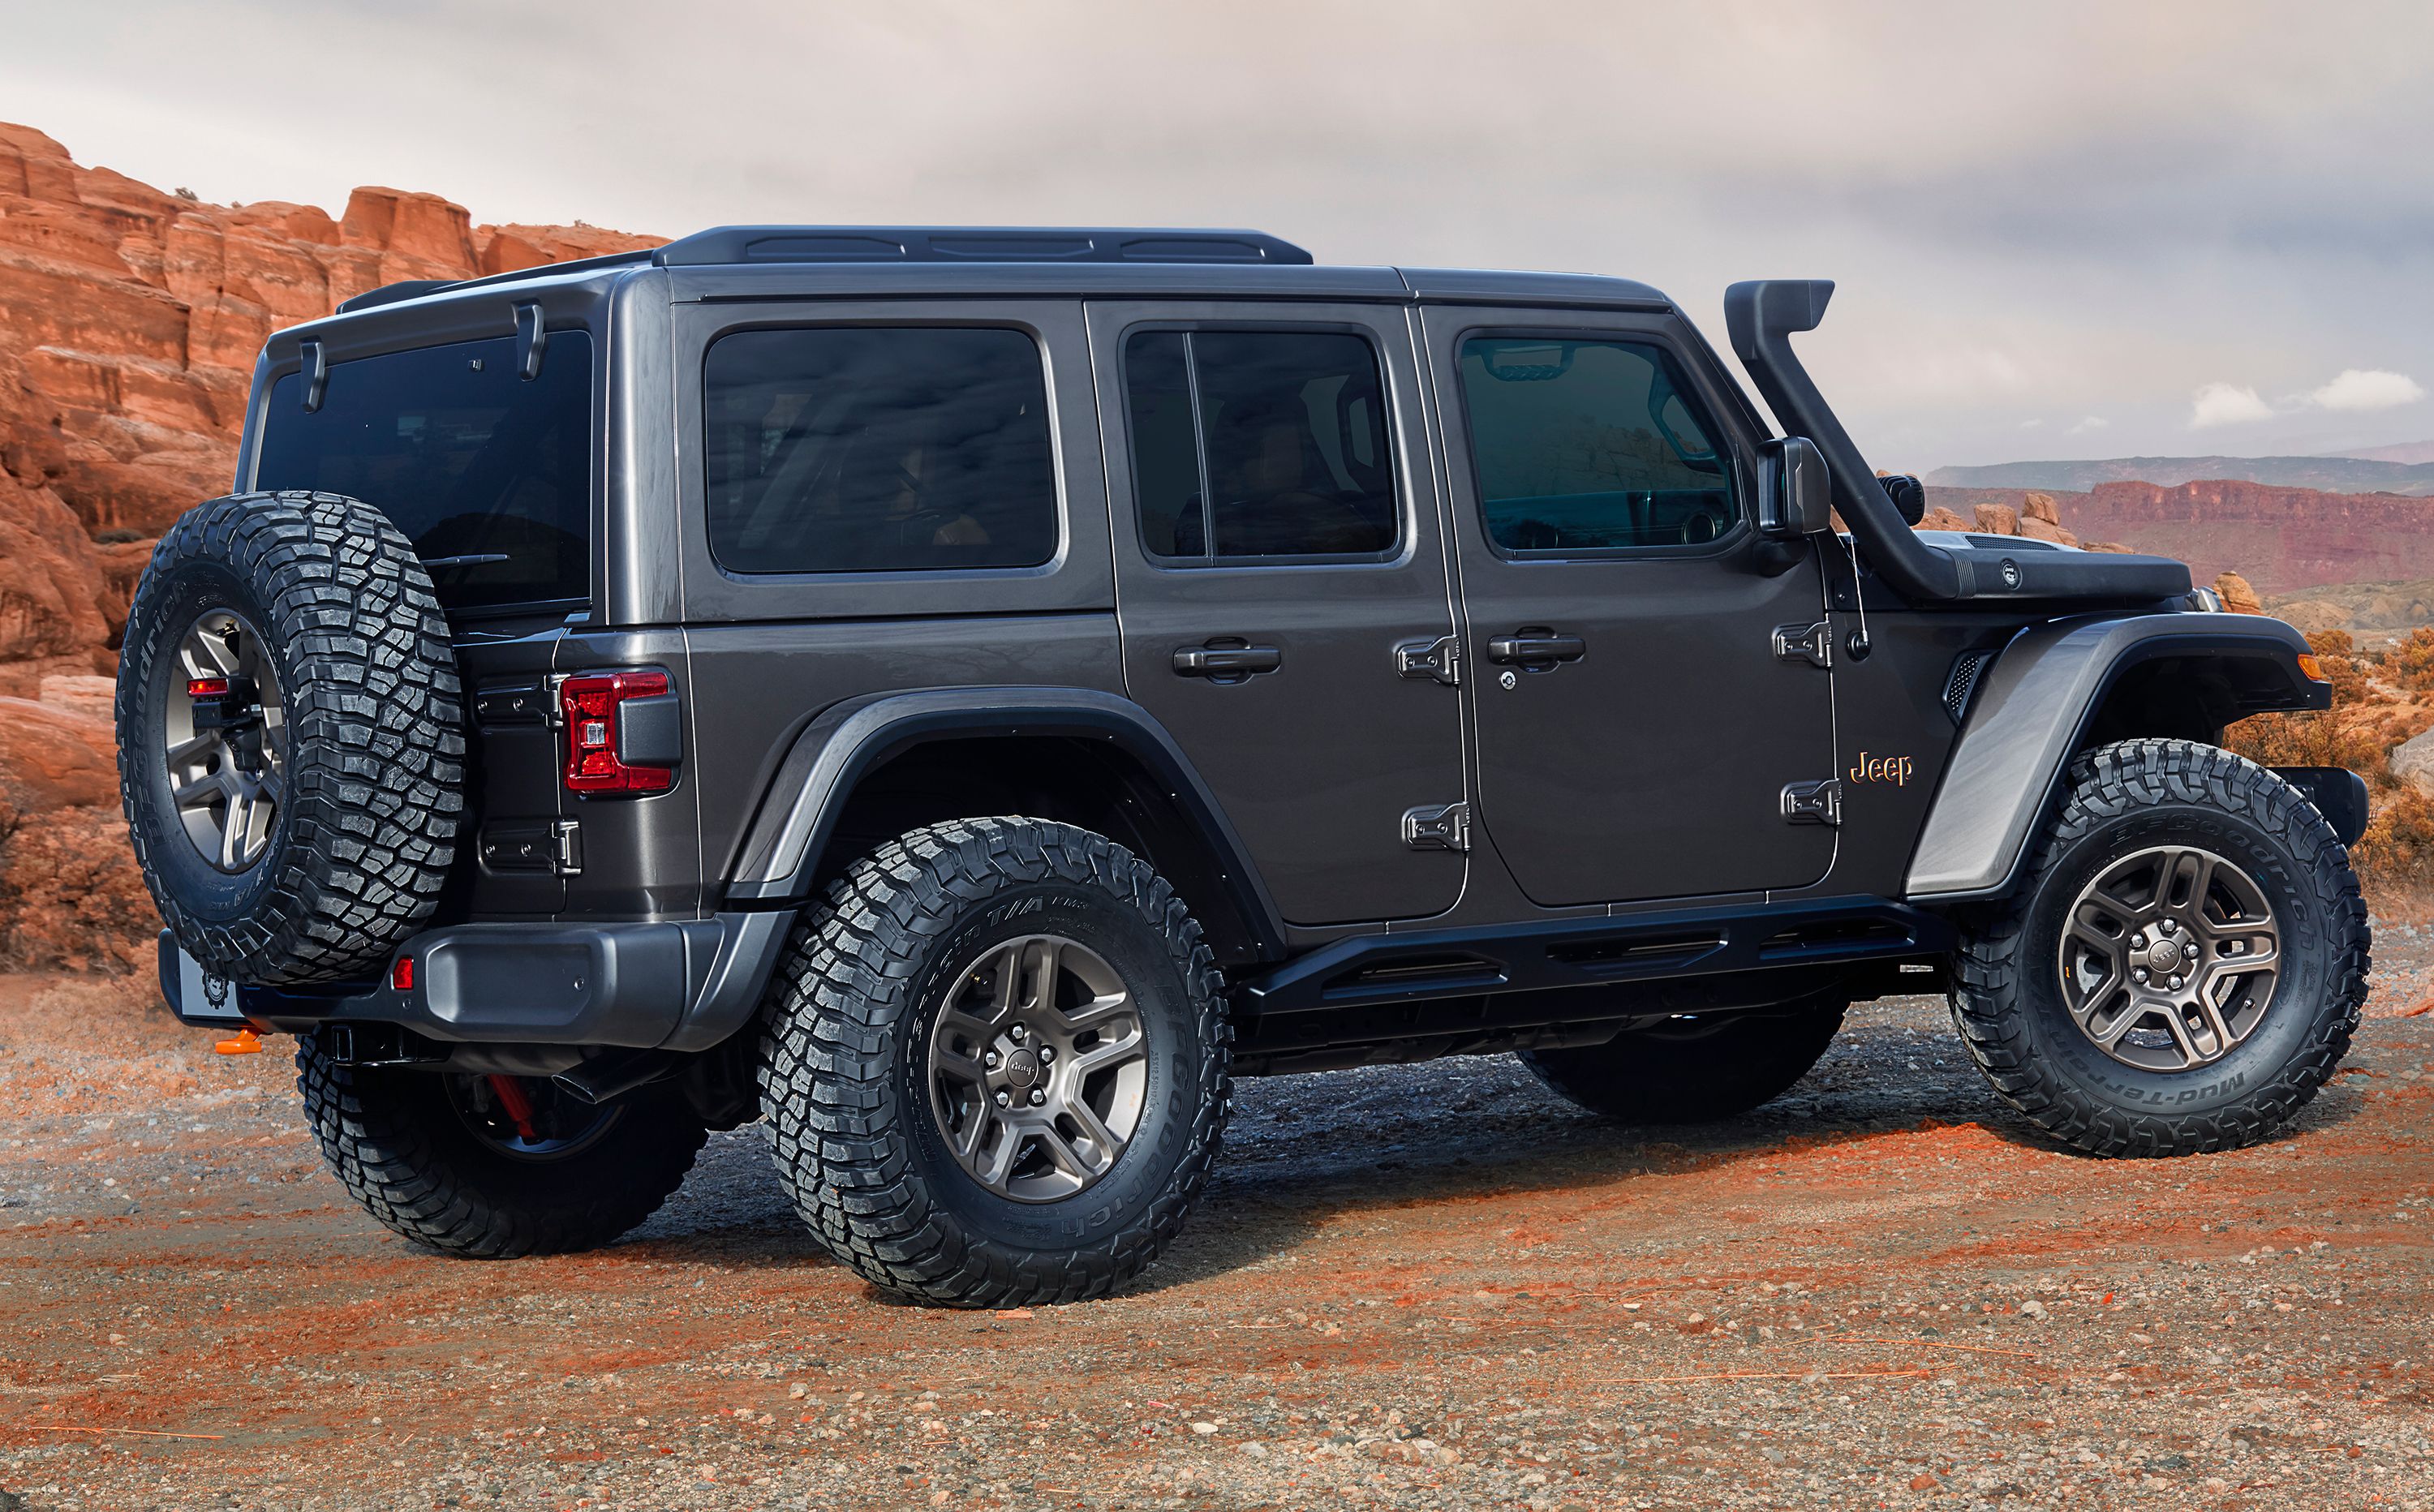 2020 Everything You Need to Know About the 2021 Jeep Wrangler Mojave